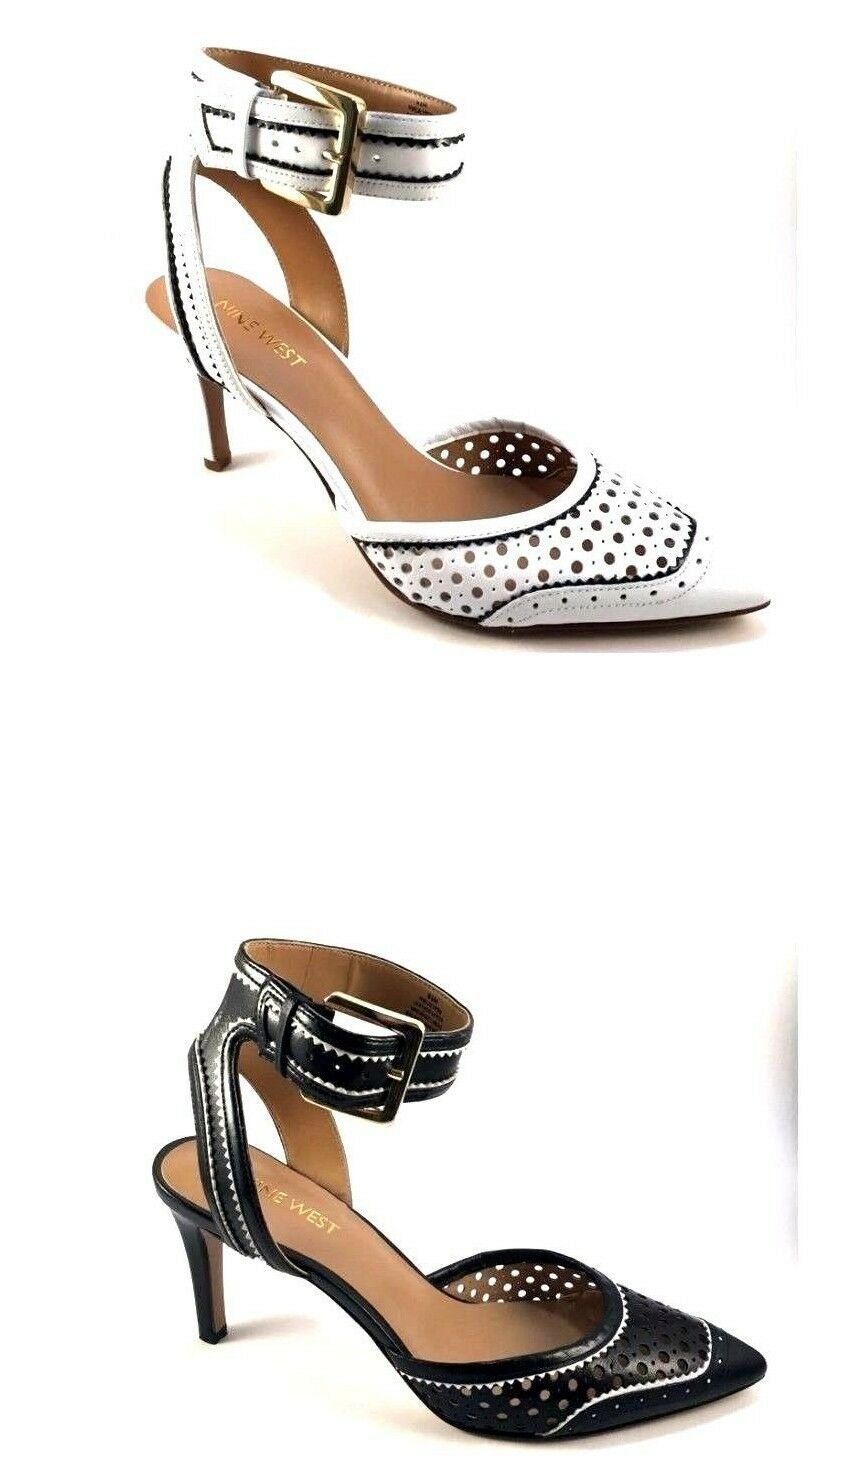 nine west forty asymmetrical strappy pumps